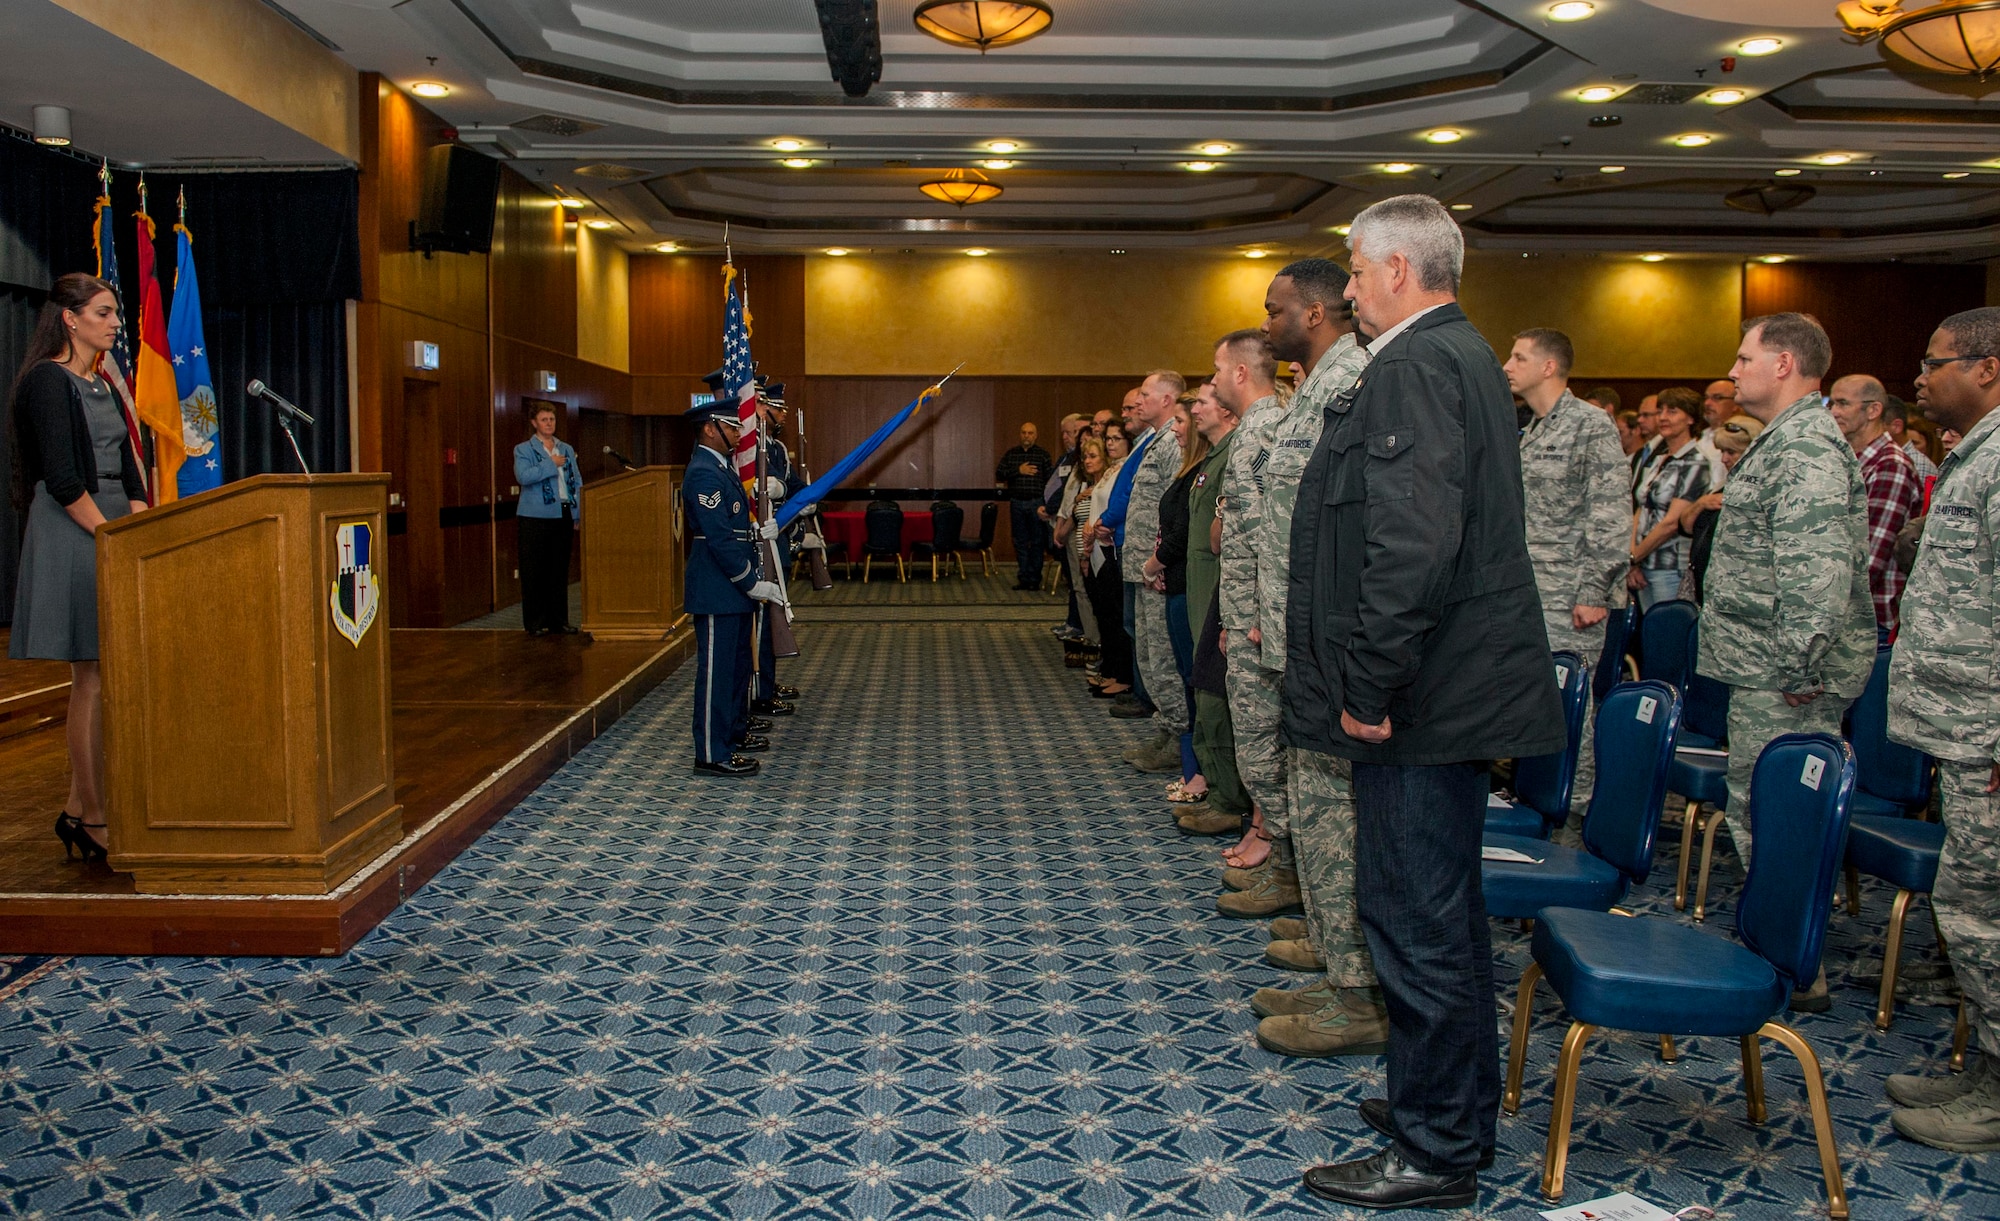 Members of the installation community stand during the presentation of the colors during the Length of Service recognition ceremony in Club Eifel at Spangdahlem Air Base, Germany, June 3, 2016. The installation held the ceremony to thank its civilian work force and their services to the base’s mission. (U.S. Air Force photo by Airman 1st Class Timothy Kim/Released)